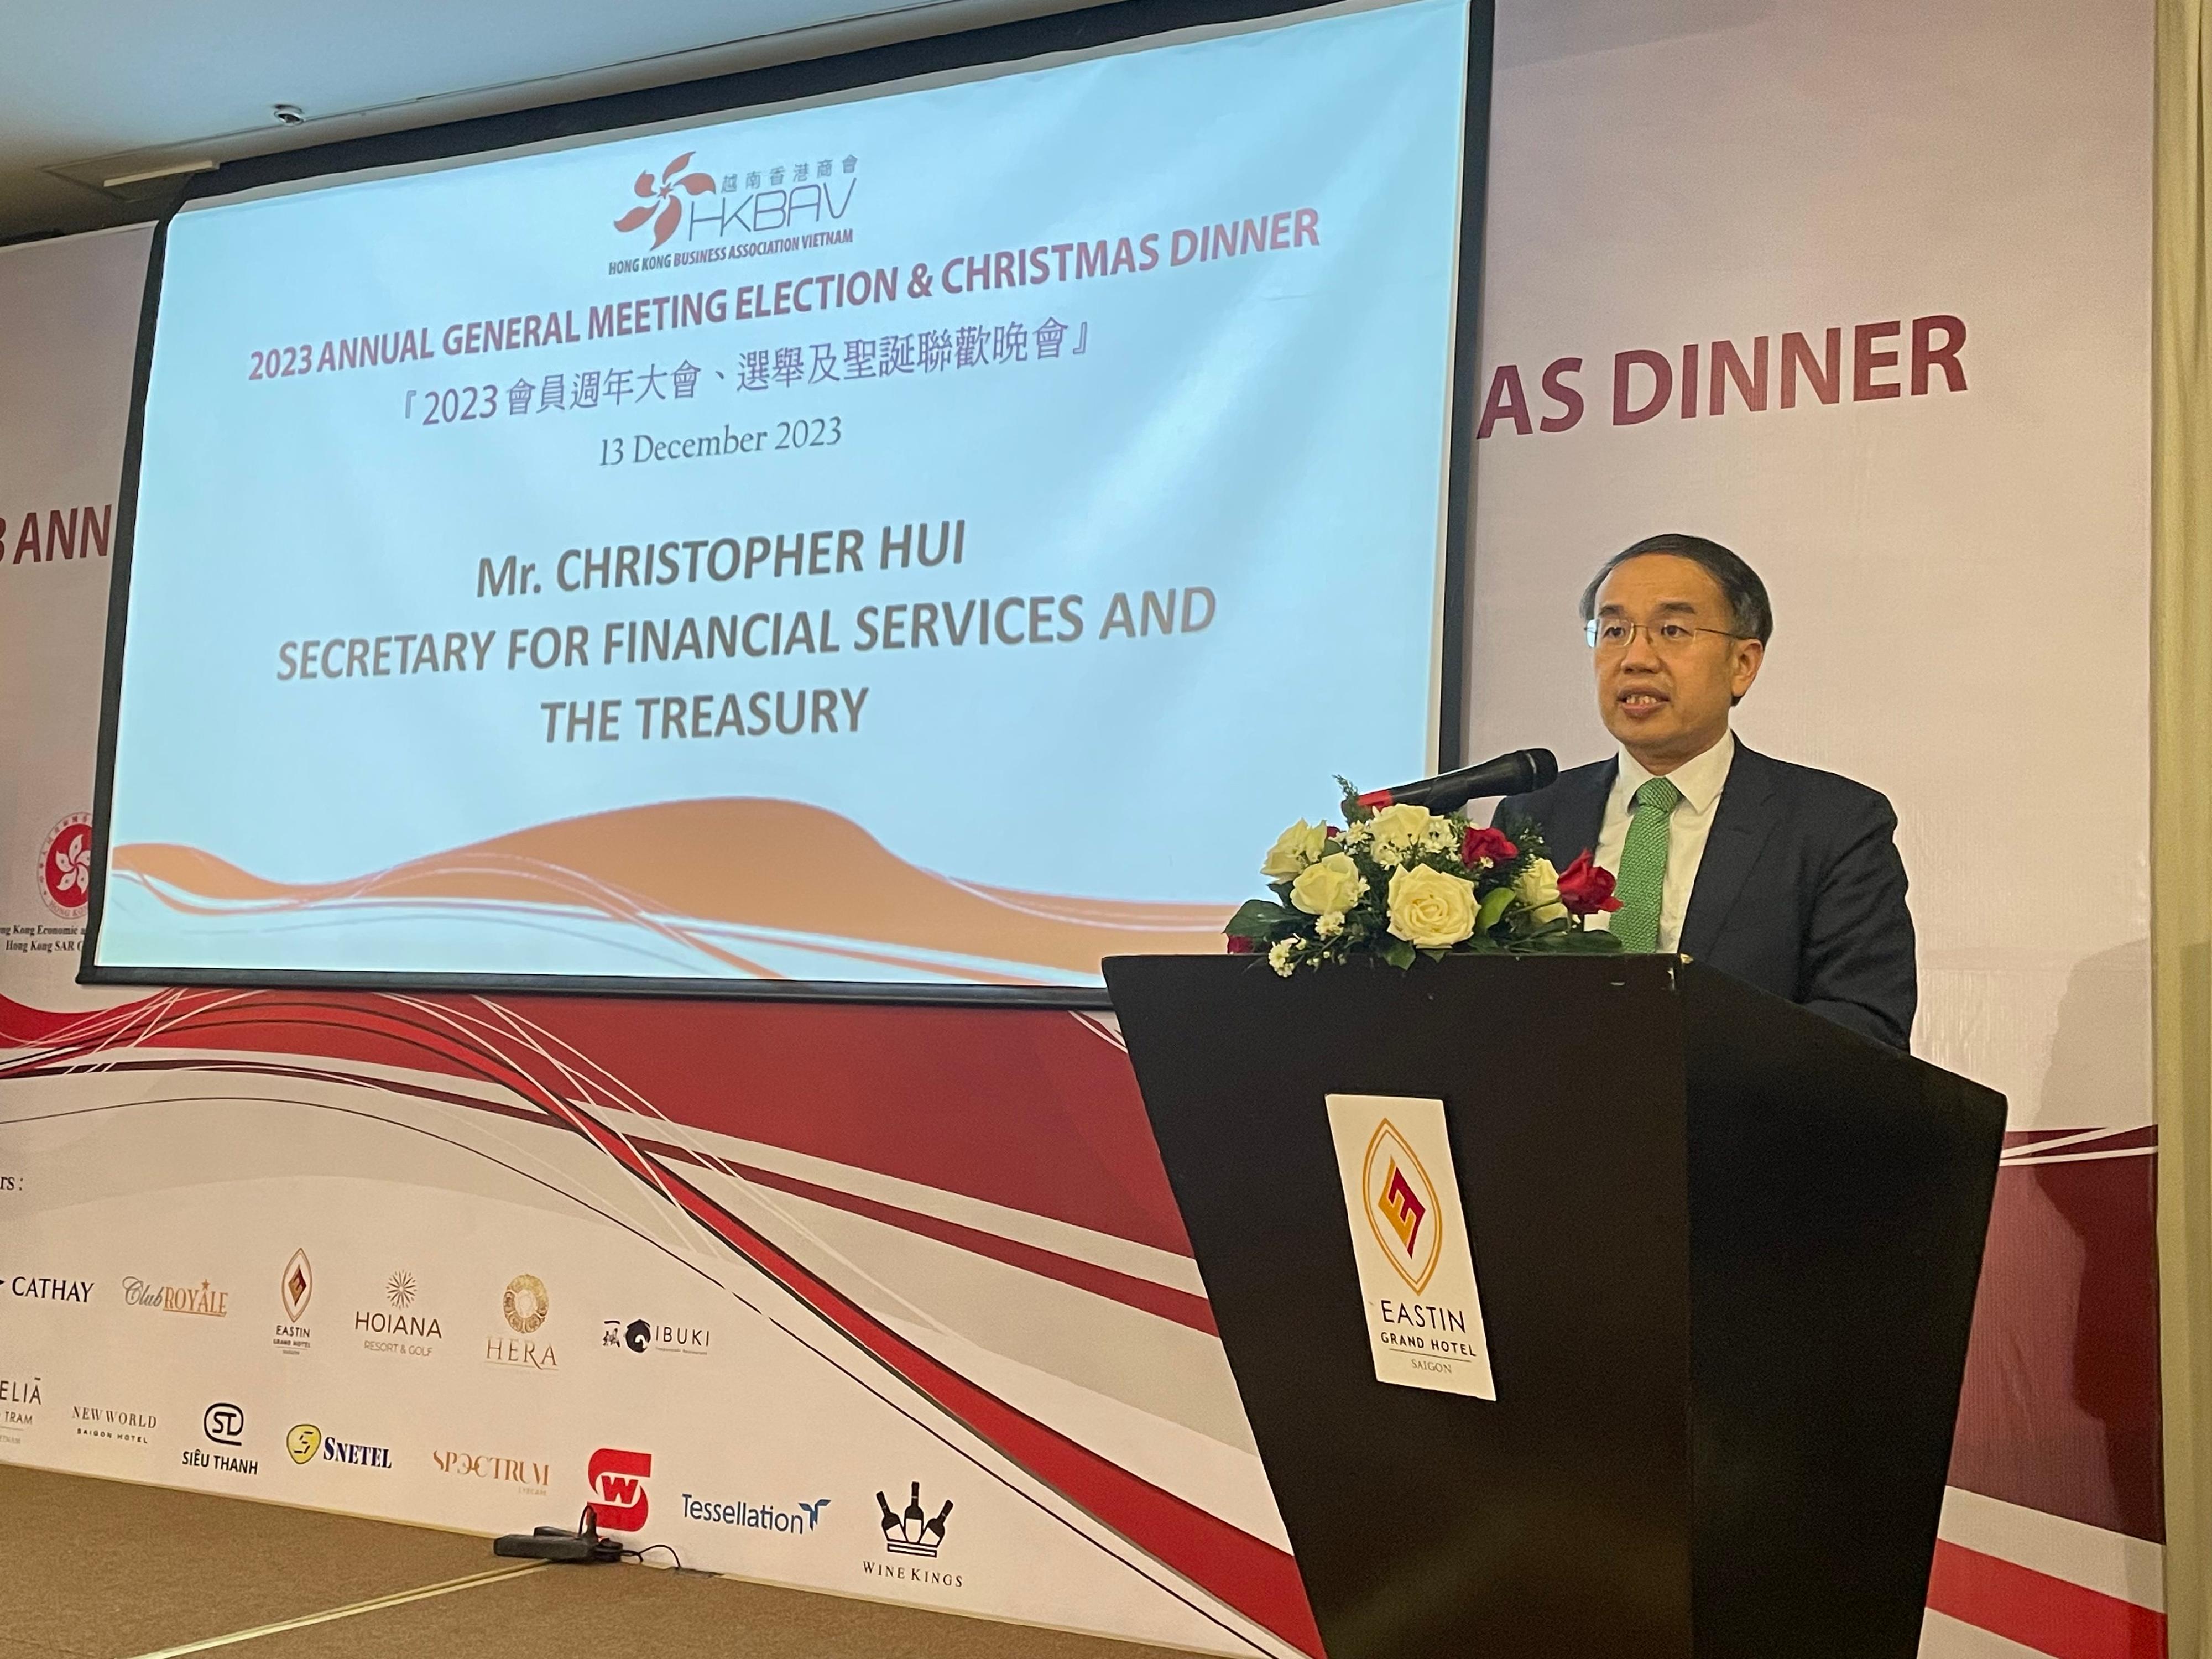 The Secretary for Financial Services and the Treasury, Mr Christopher Hui, today (December 13) started his visit in Vietnam. Photo shows Mr Hui addressing the Christmas dinner organised by the Hong Kong Business Association Vietnam in Ho Chi Minh City.